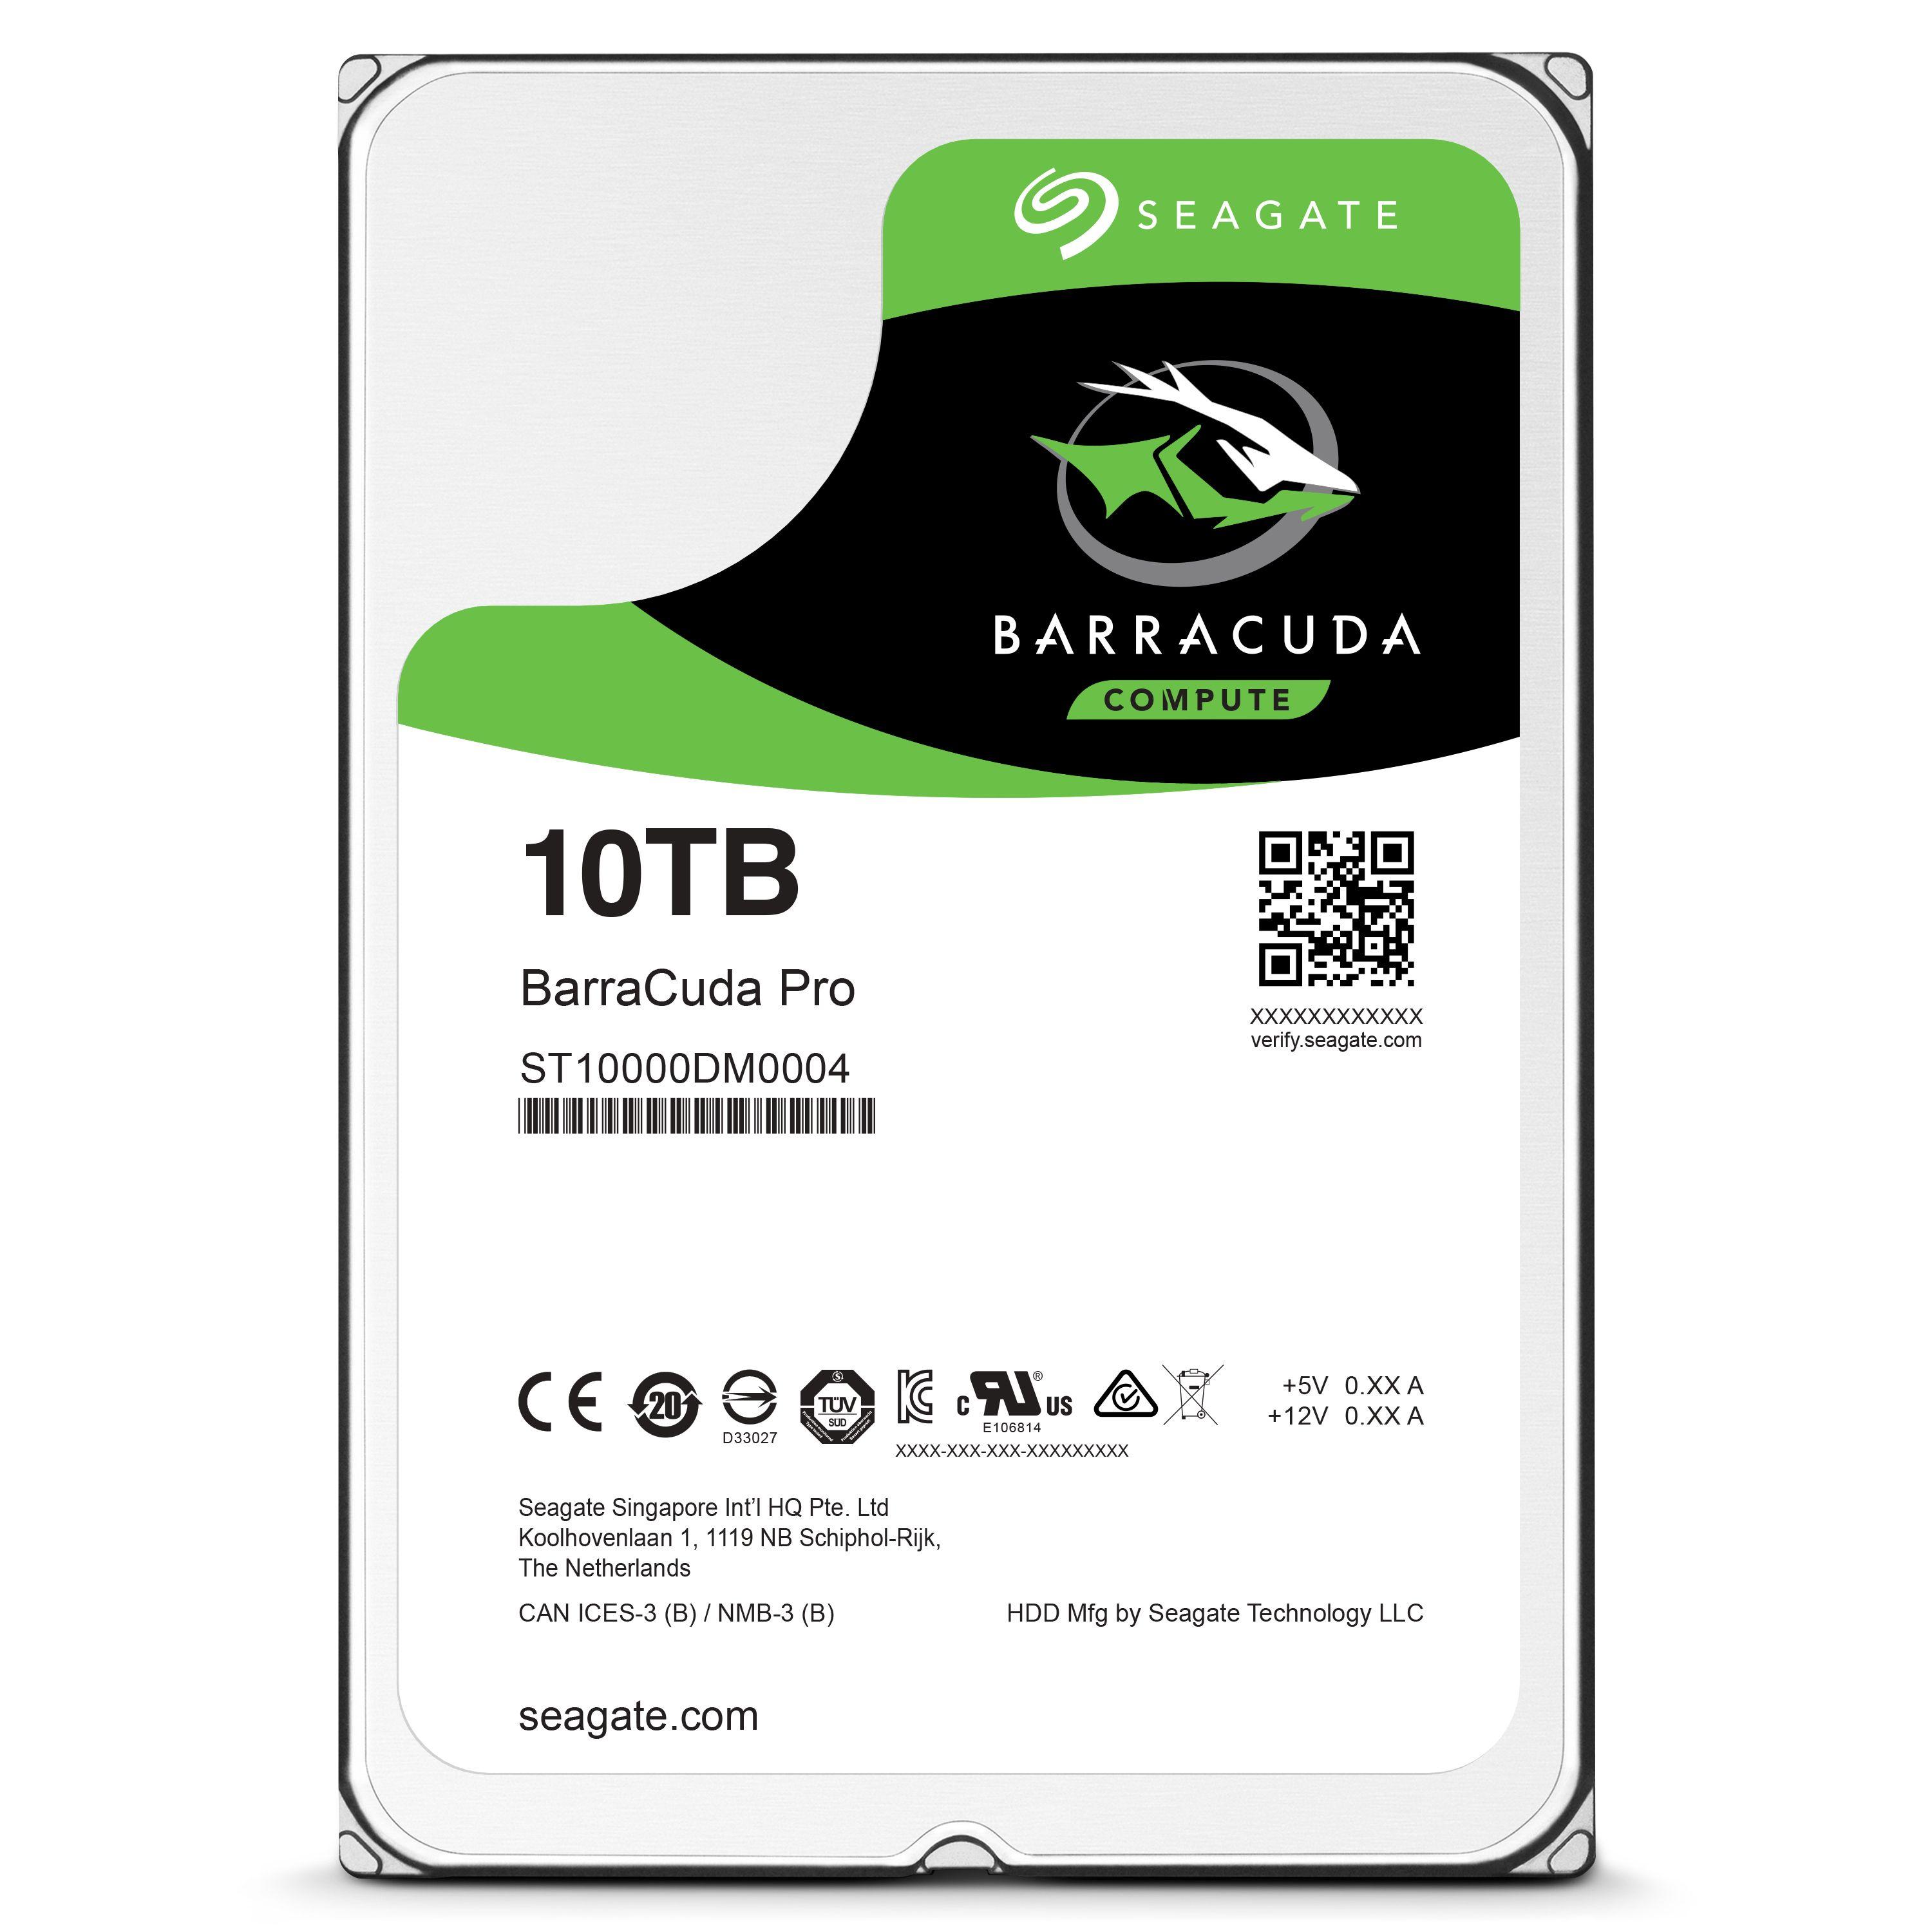 HDD Seagate Logo - Seagate unveils hard drives with up to 10TB capacity